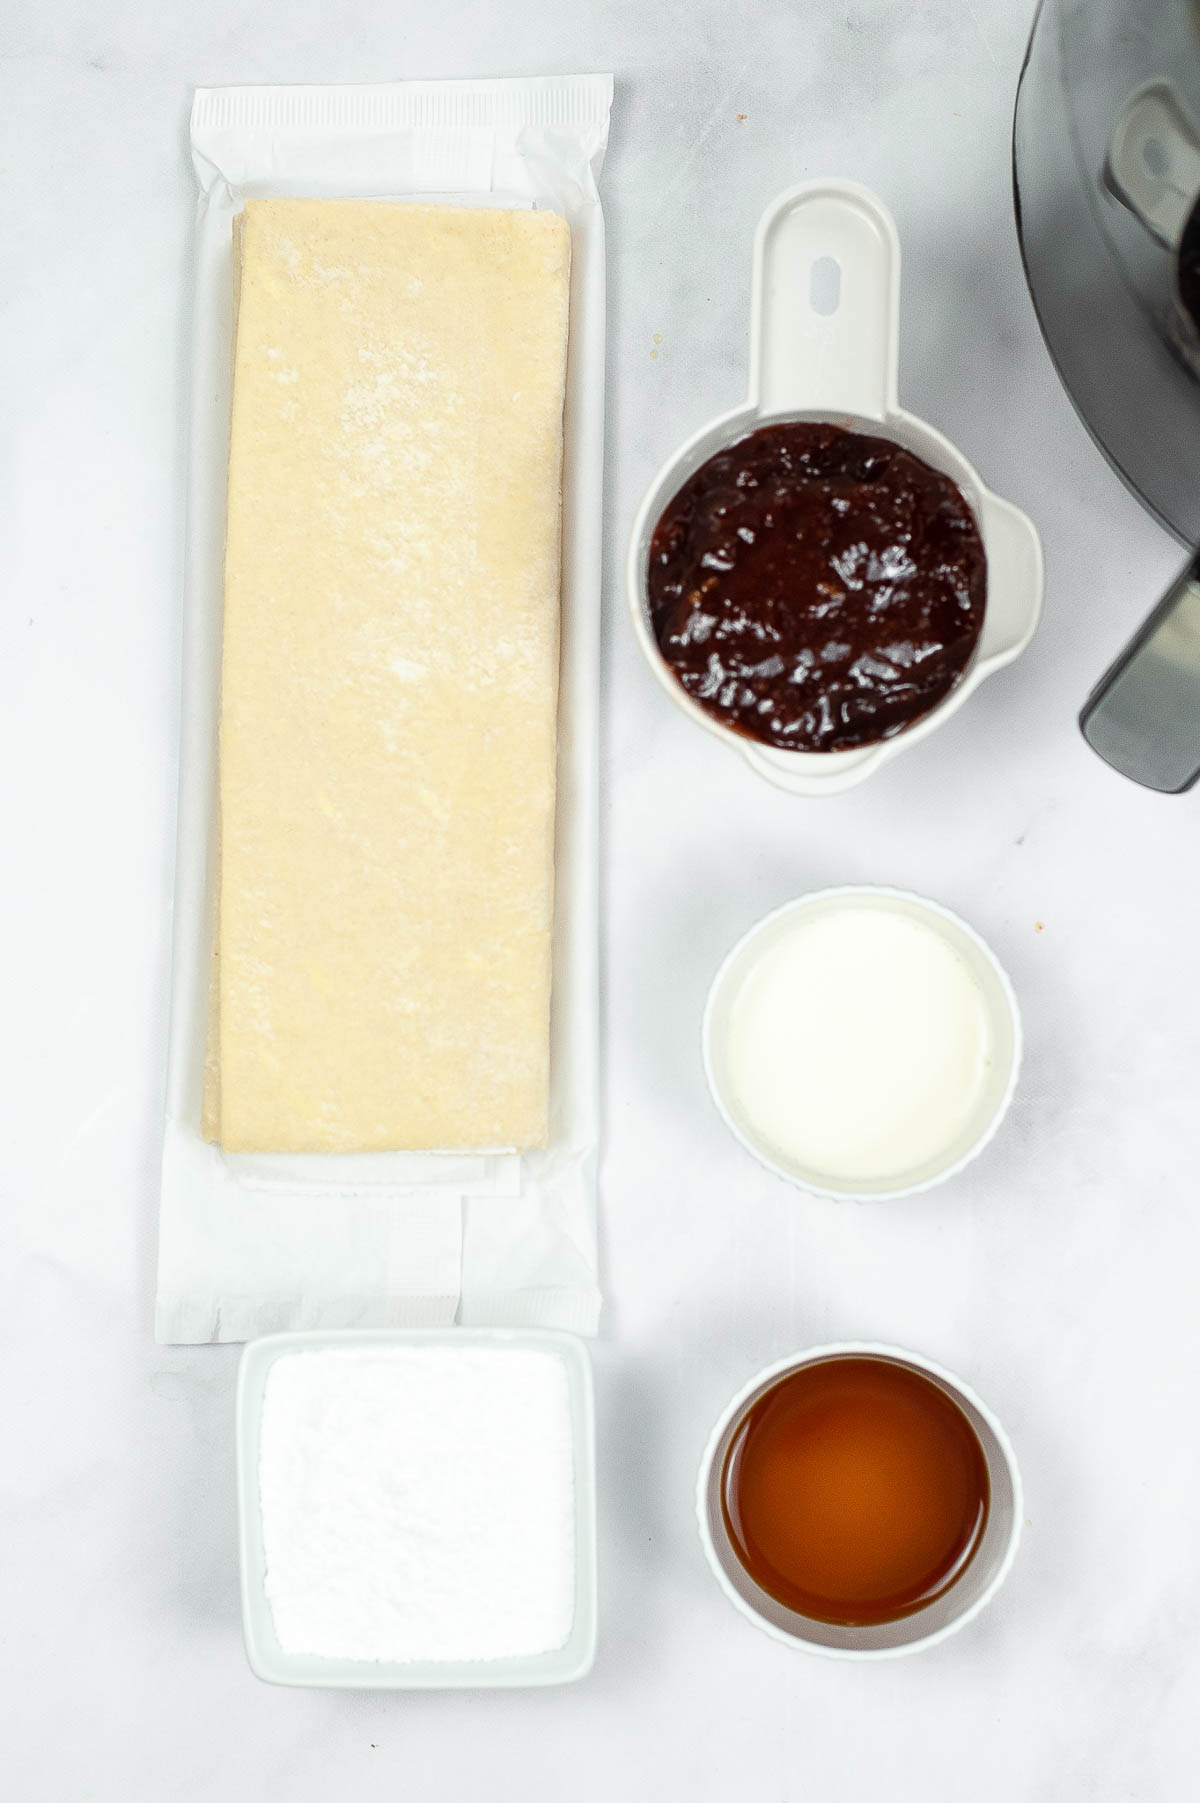 Ingredients to make puff pastry toaster strudel in an air fryer